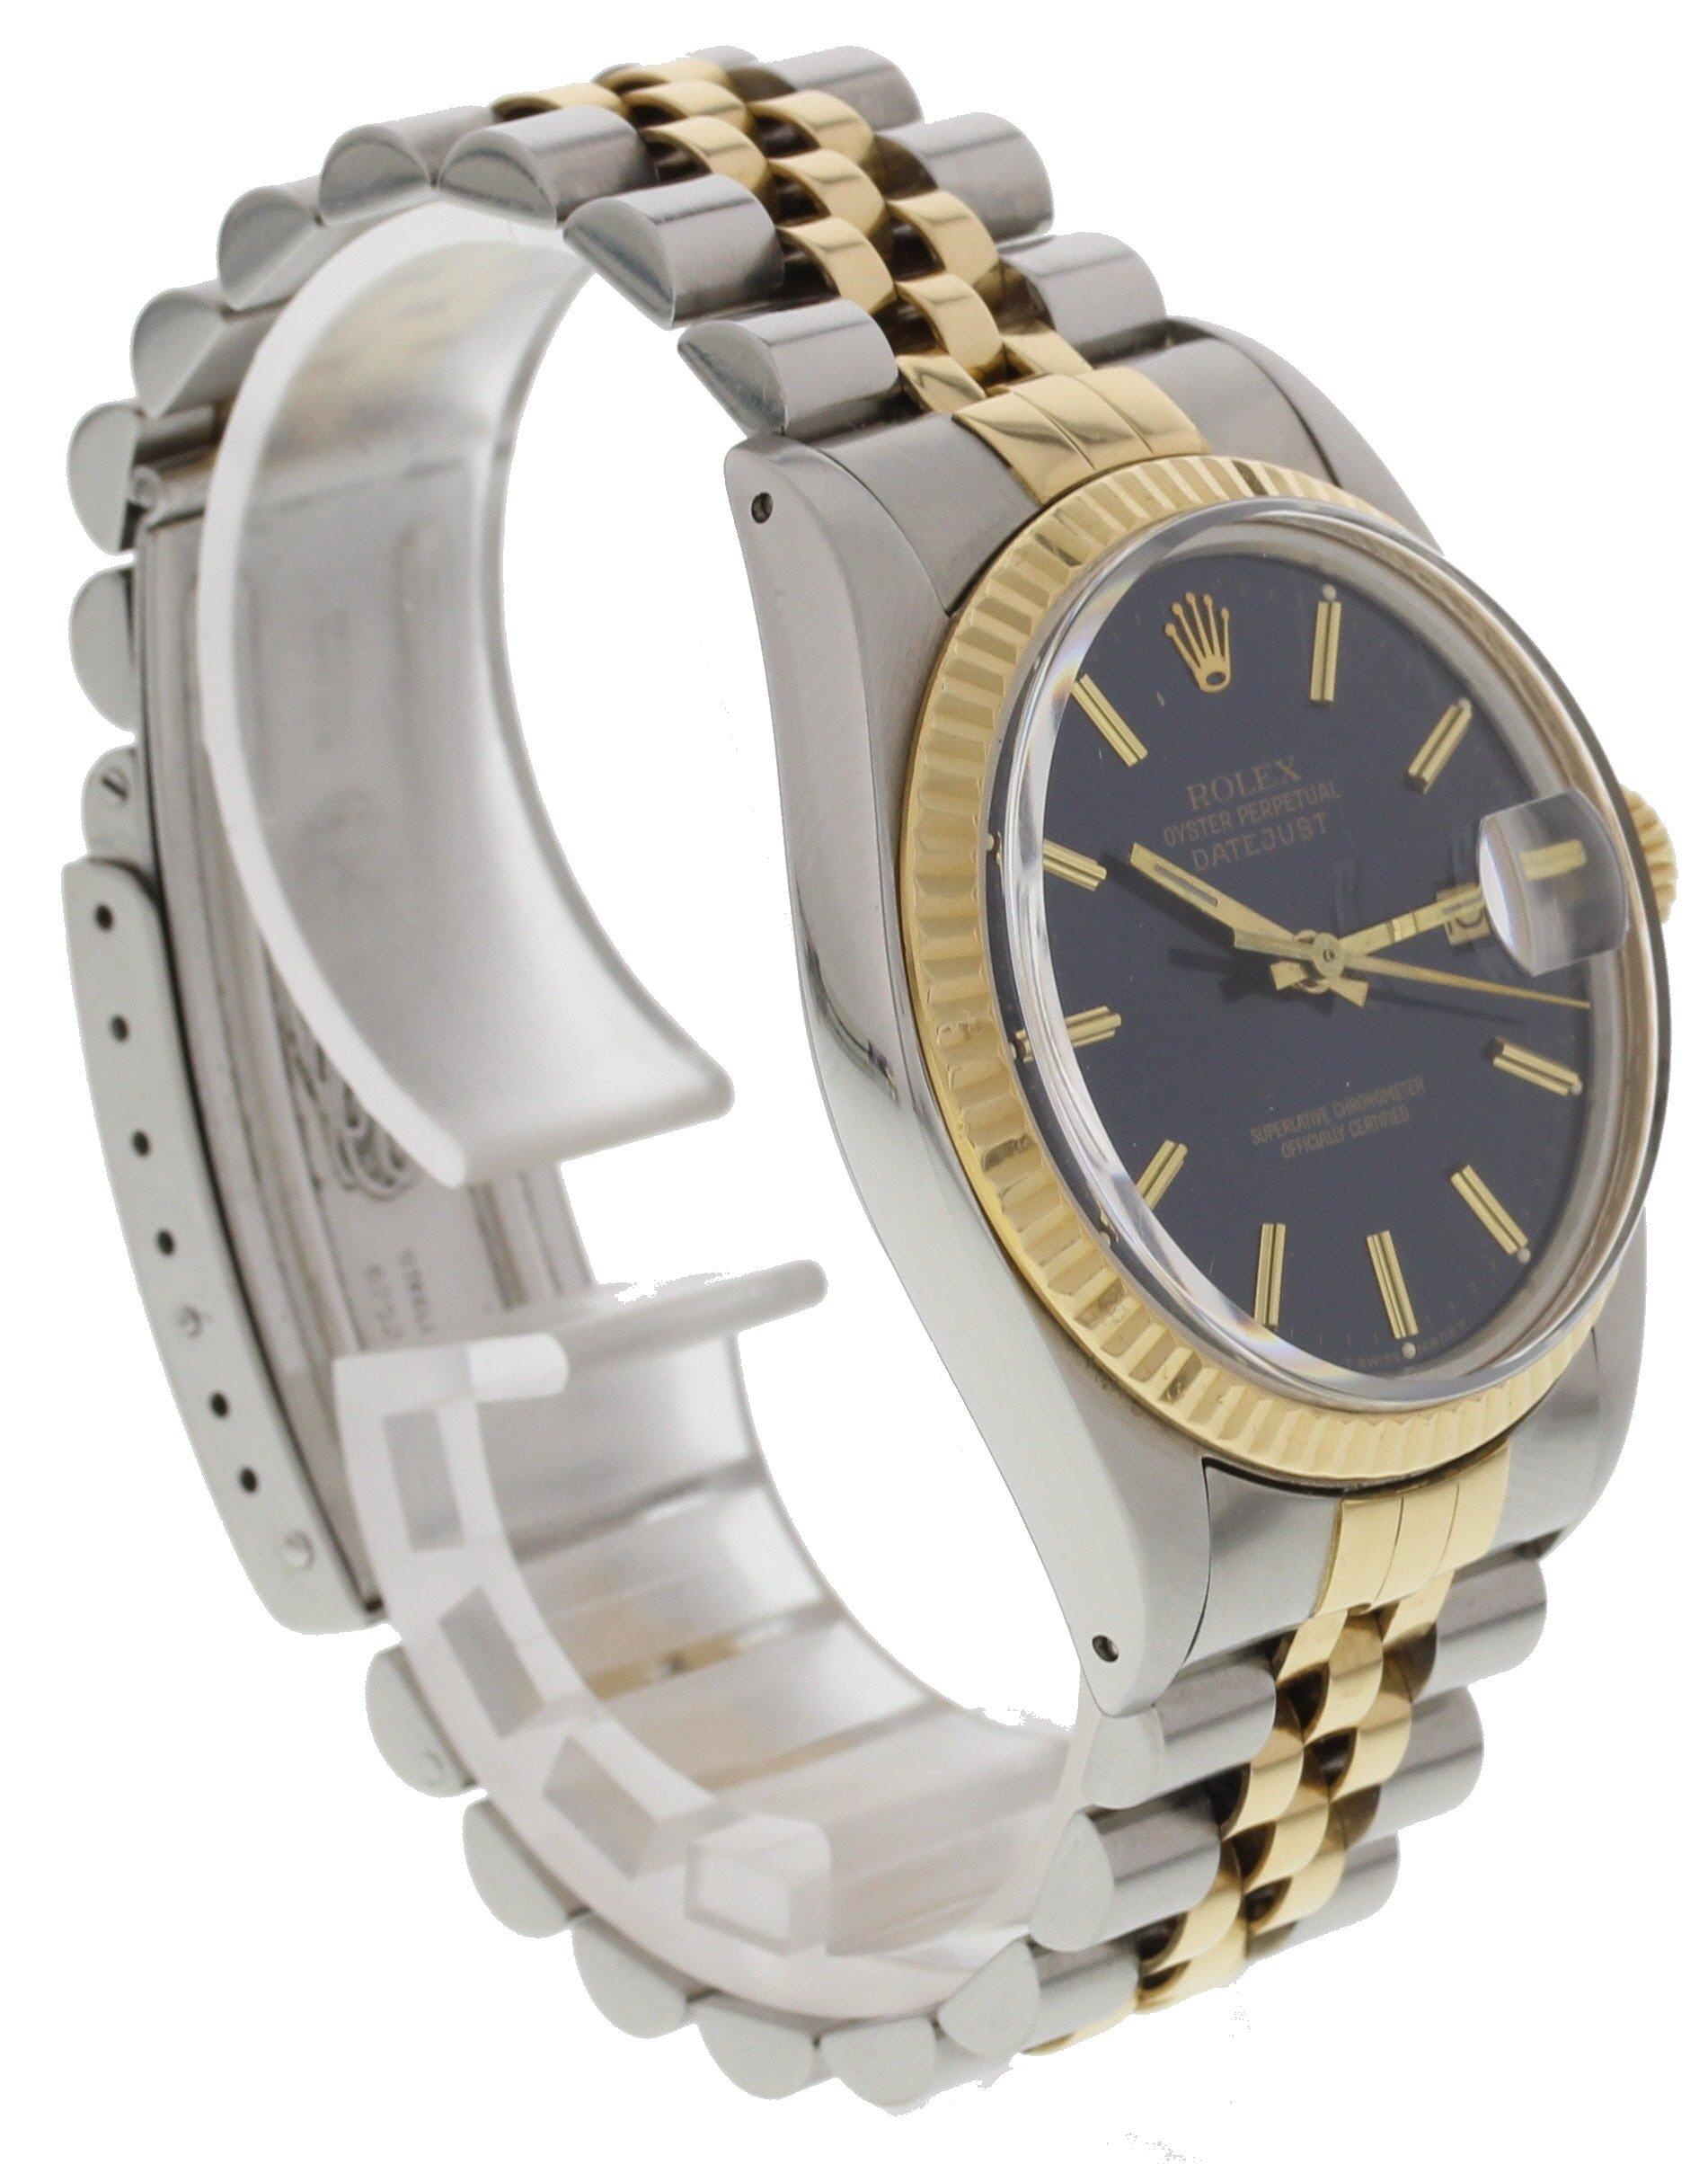 Rolex Oyster Perpetual Datejust. Stainless steel 36mm case. 18k yellow gold fluted bezel. Blue dial with date display with gold hands and markers. 18k yellow gold and stainless steel band with stainless steel fold over clasp. Will fit up to a 7 inch